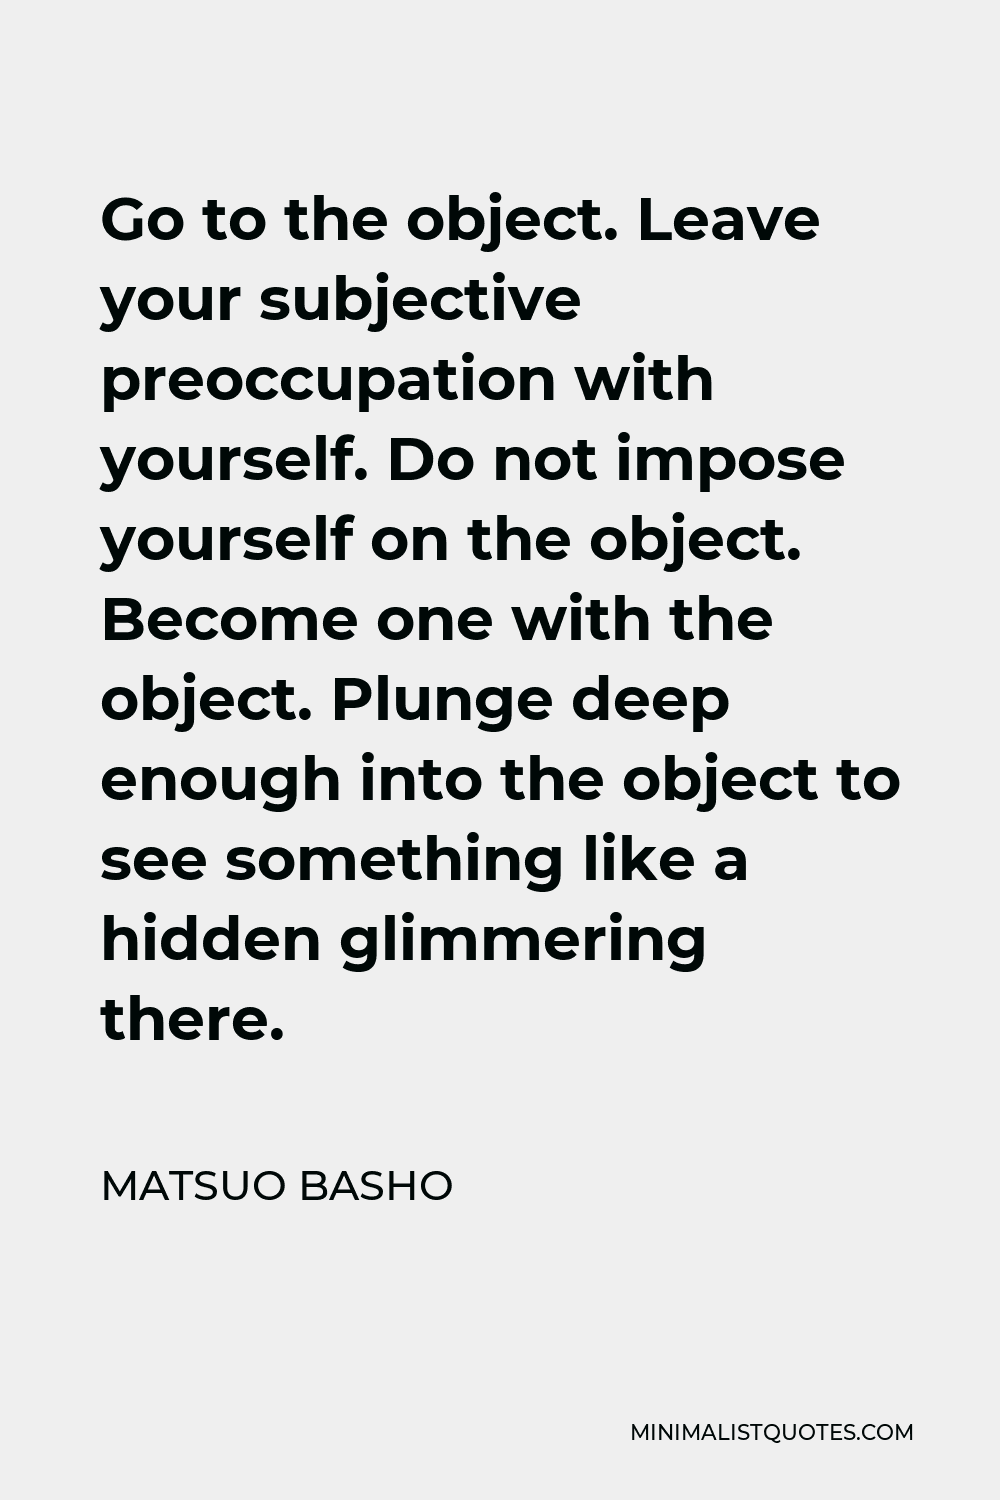 Matsuo Basho Quote - Go to the object. Leave your subjective preoccupation with yourself. Do not impose yourself on the object. Become one with the object. Plunge deep enough into the object to see something like a hidden glimmering there.